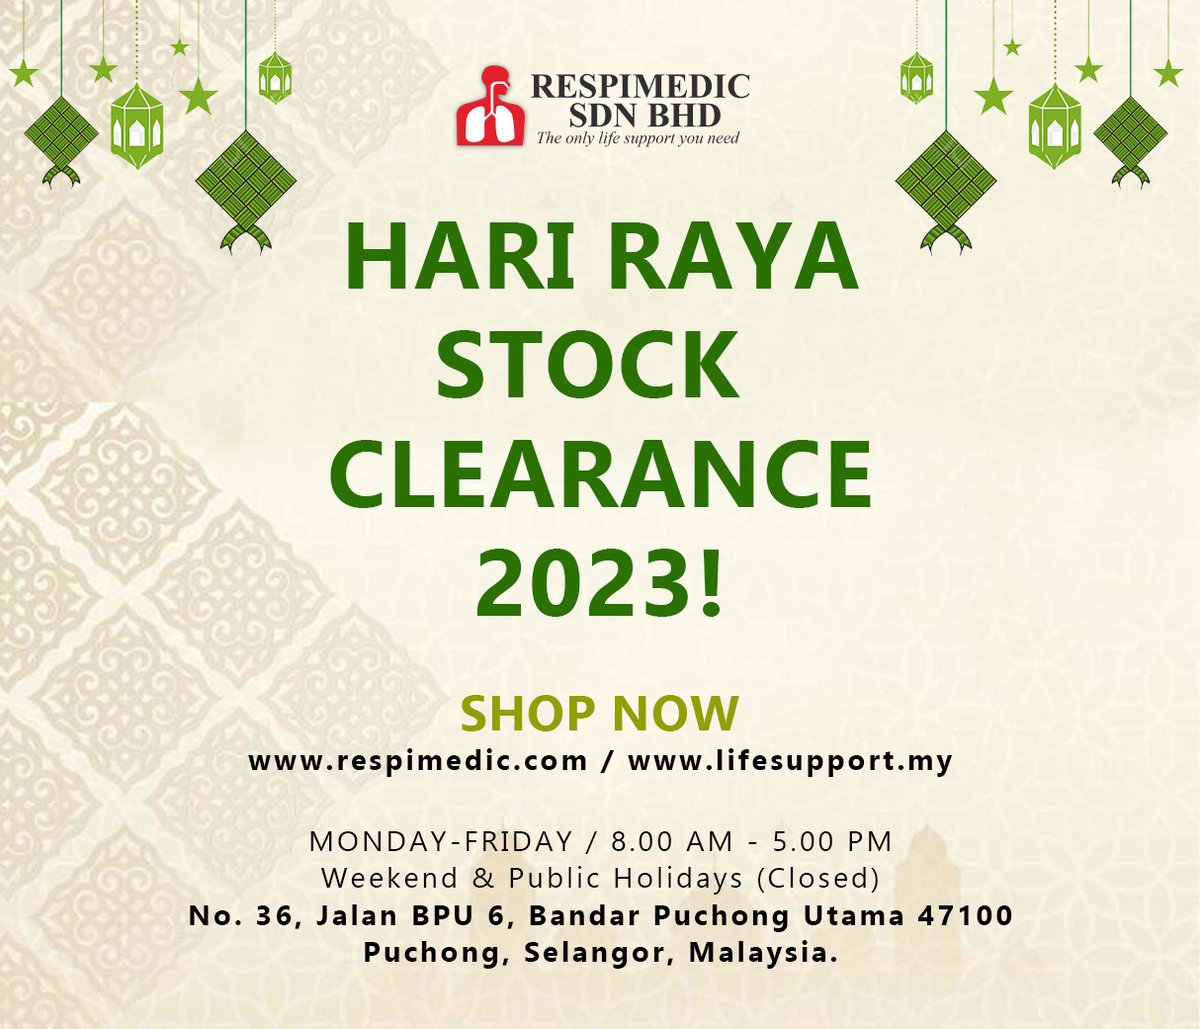 HARI RAYA STOCK CLEARANCE 2023!

#medicalequipment #medicalsupplies #medicaldevices #medicalproducts #hospital #pharmacy #homecare #PrivateHospitals #govermenthospital #HariRayaPromo #hariraya #hariraya2023 #promotion #stockclearance #HotSale #salesalesale #saleraya